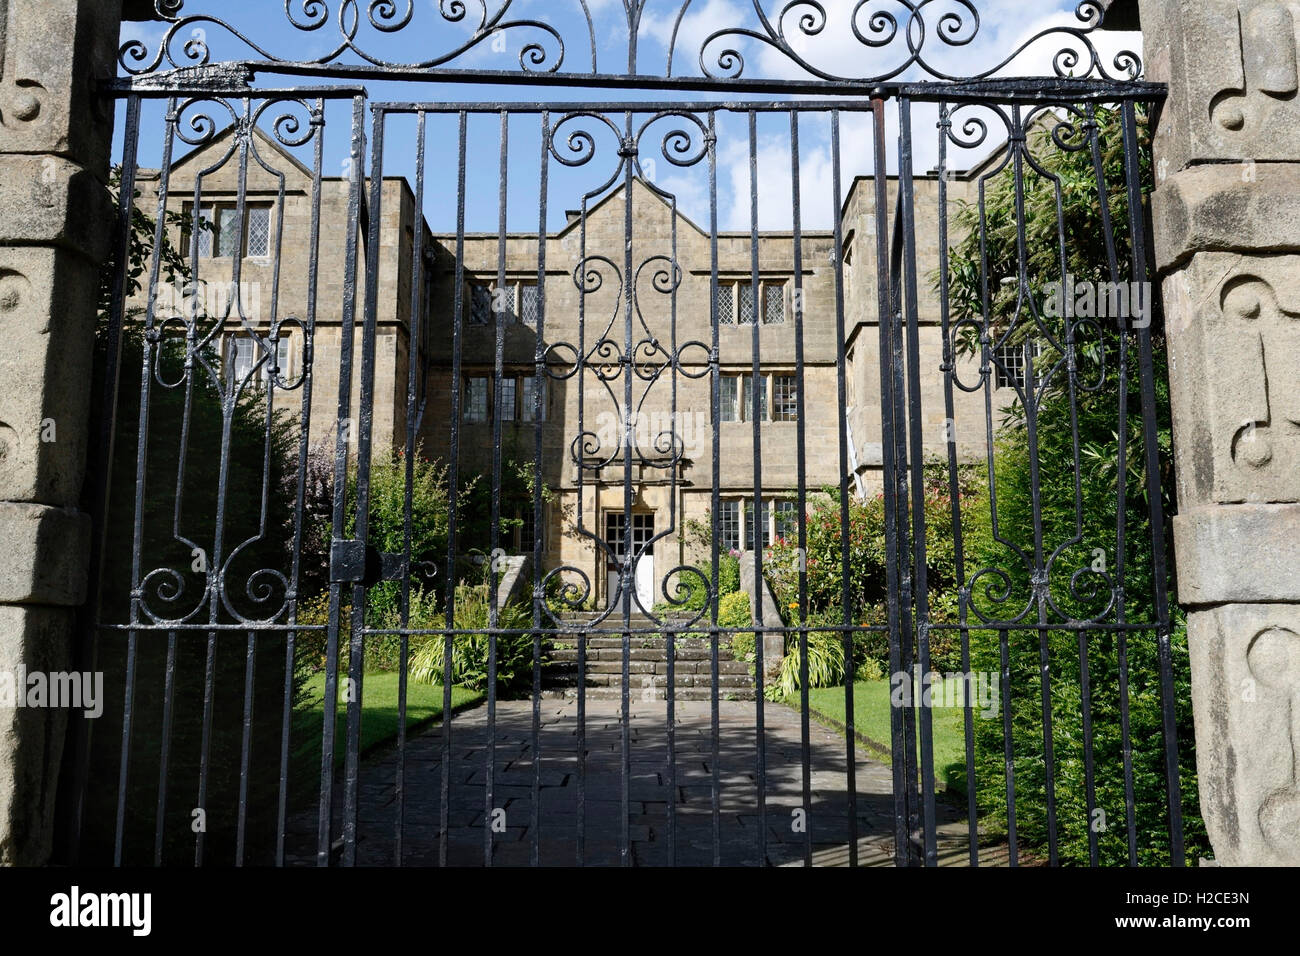 Eyam Hall Derbyshire Peak District National Park England UK, Jacobian architecture, historic manor house, grade II* listed building, closed metal gate Stock Photo